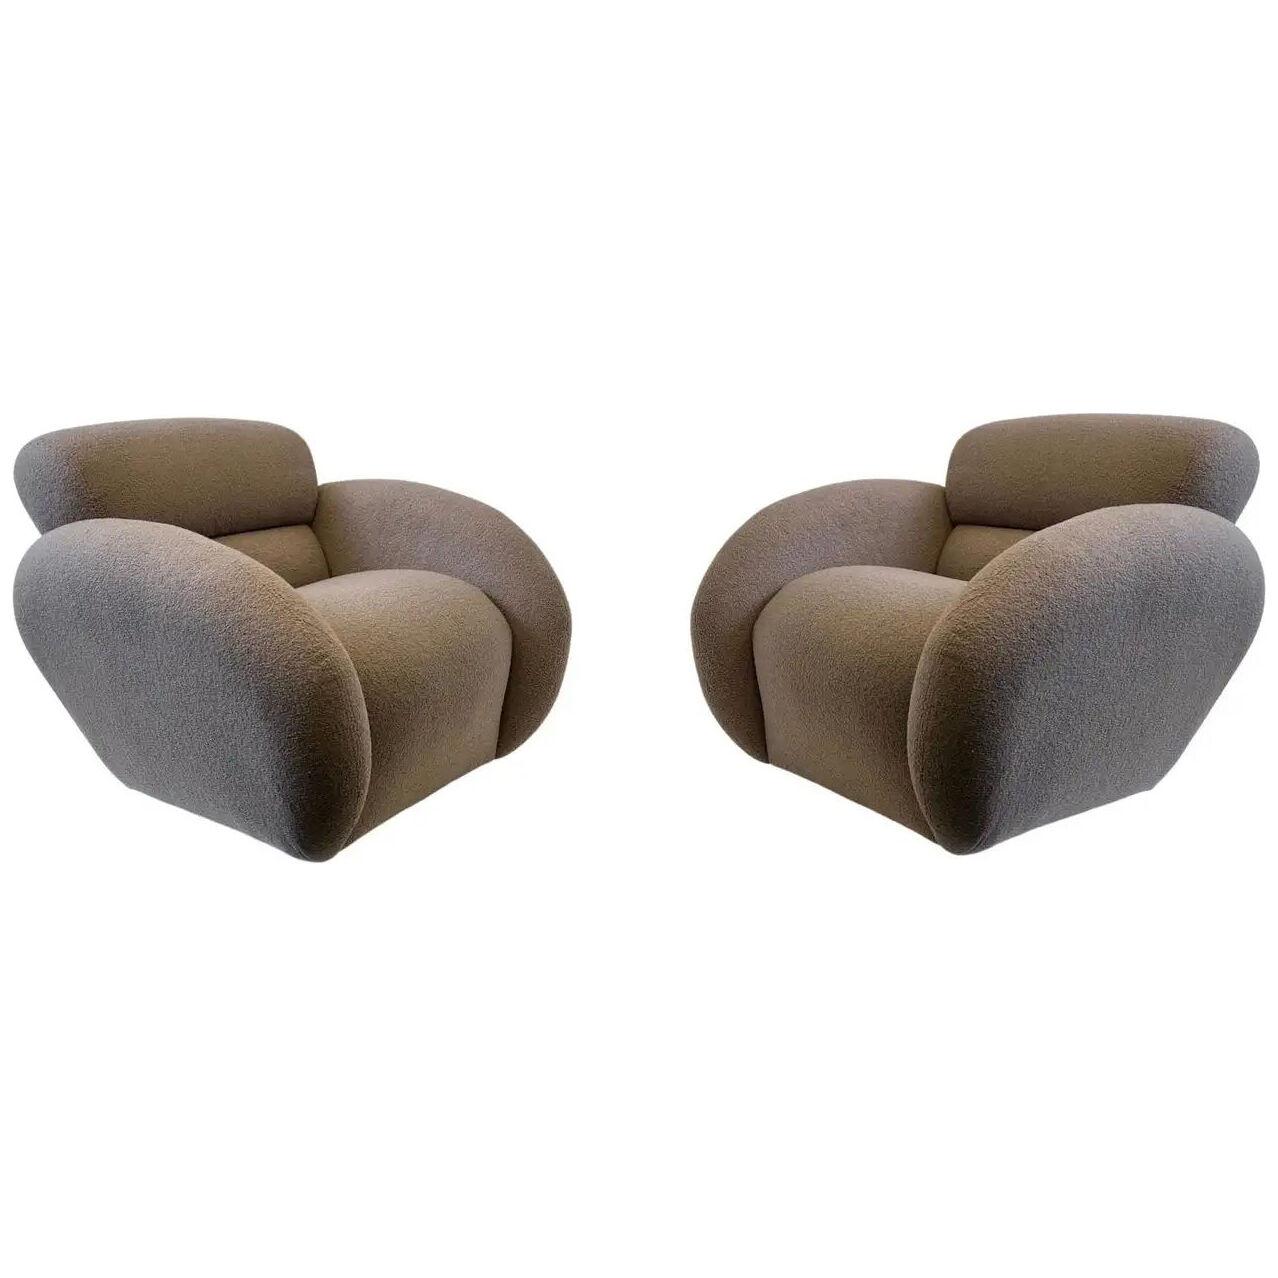 Pair of Bouclé Swivel Sculptural Lounge Chairs by Directional